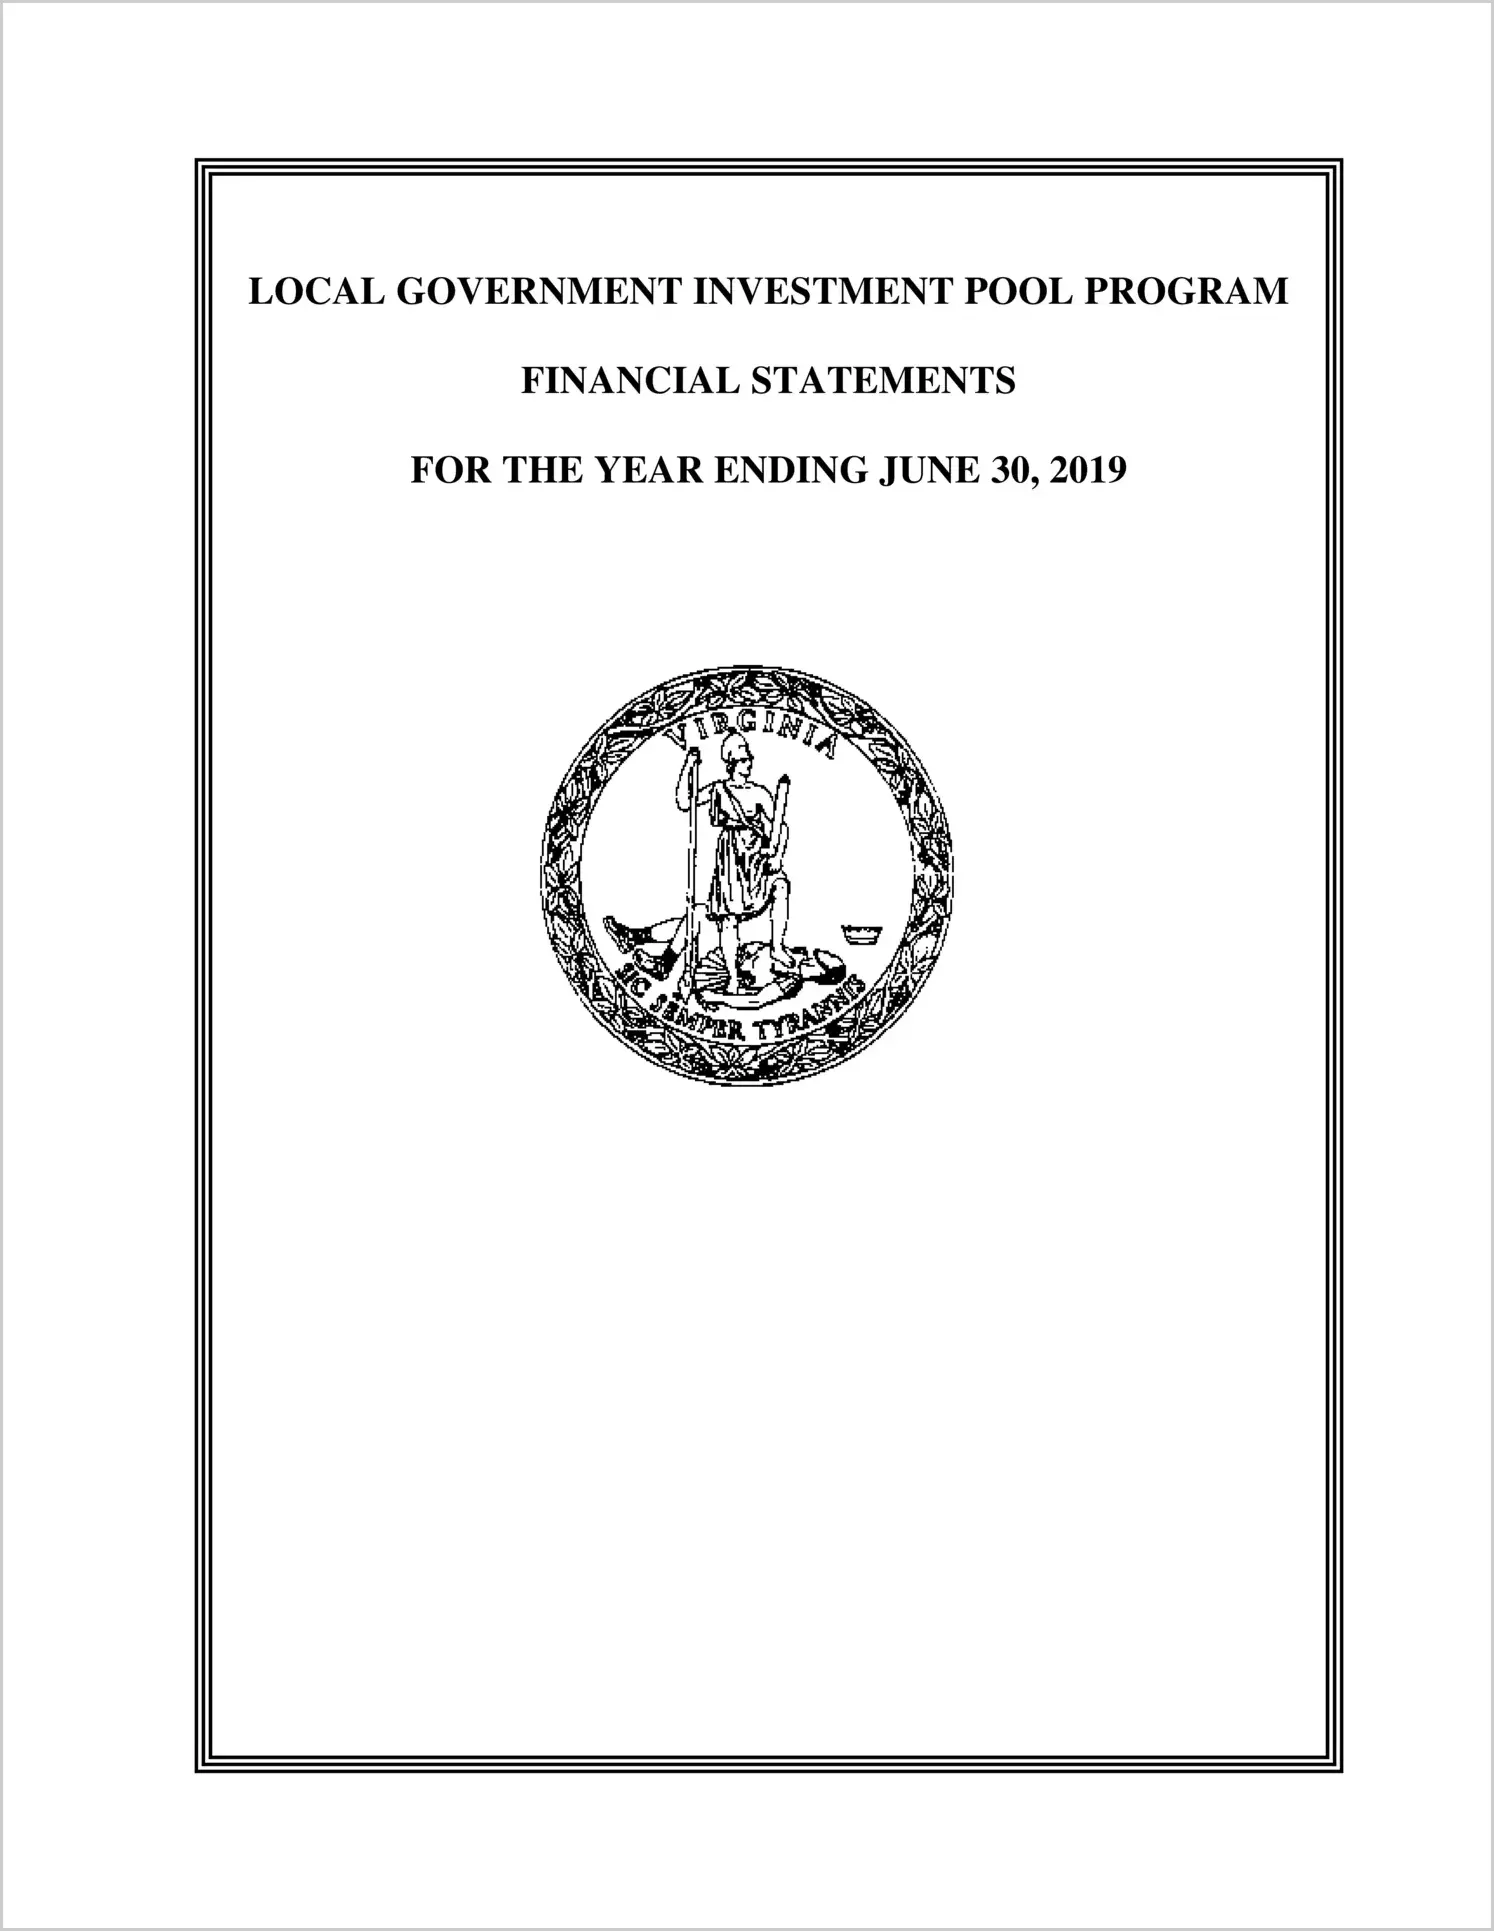 Local Government Investment Pool Program Financial Statements for the year ended June 30, 2019